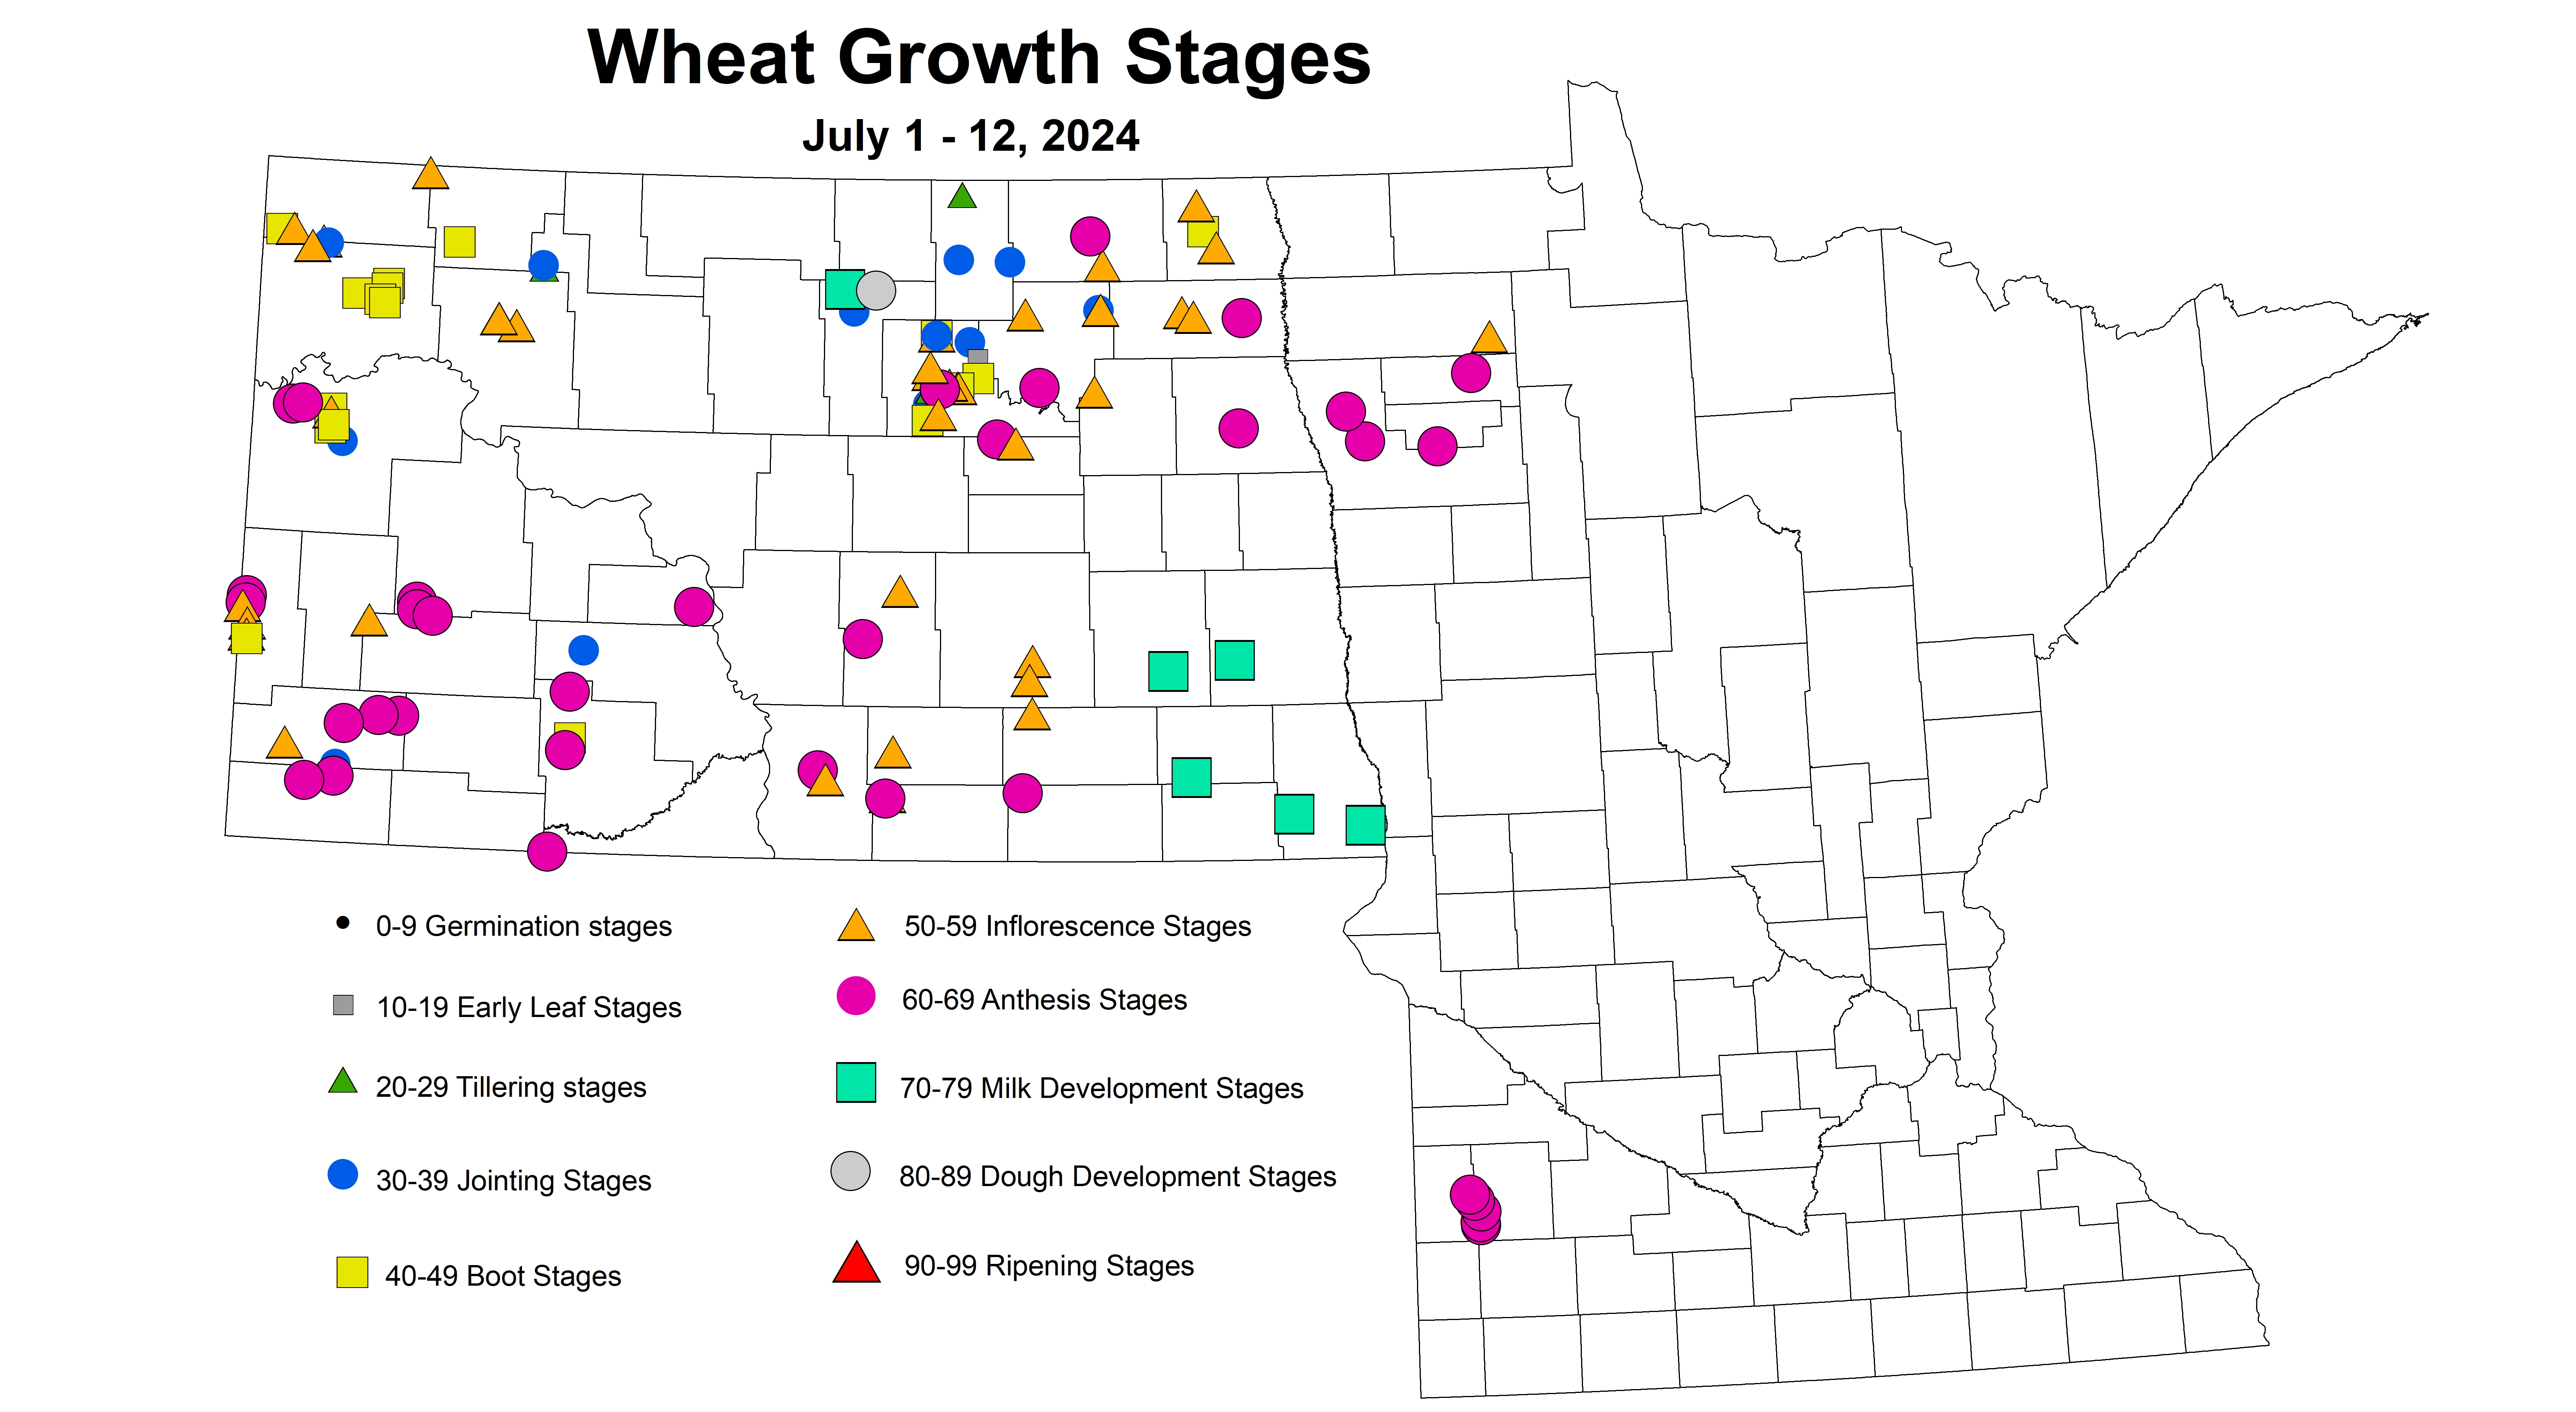 wheat growth stages 2024 7.1-7.12